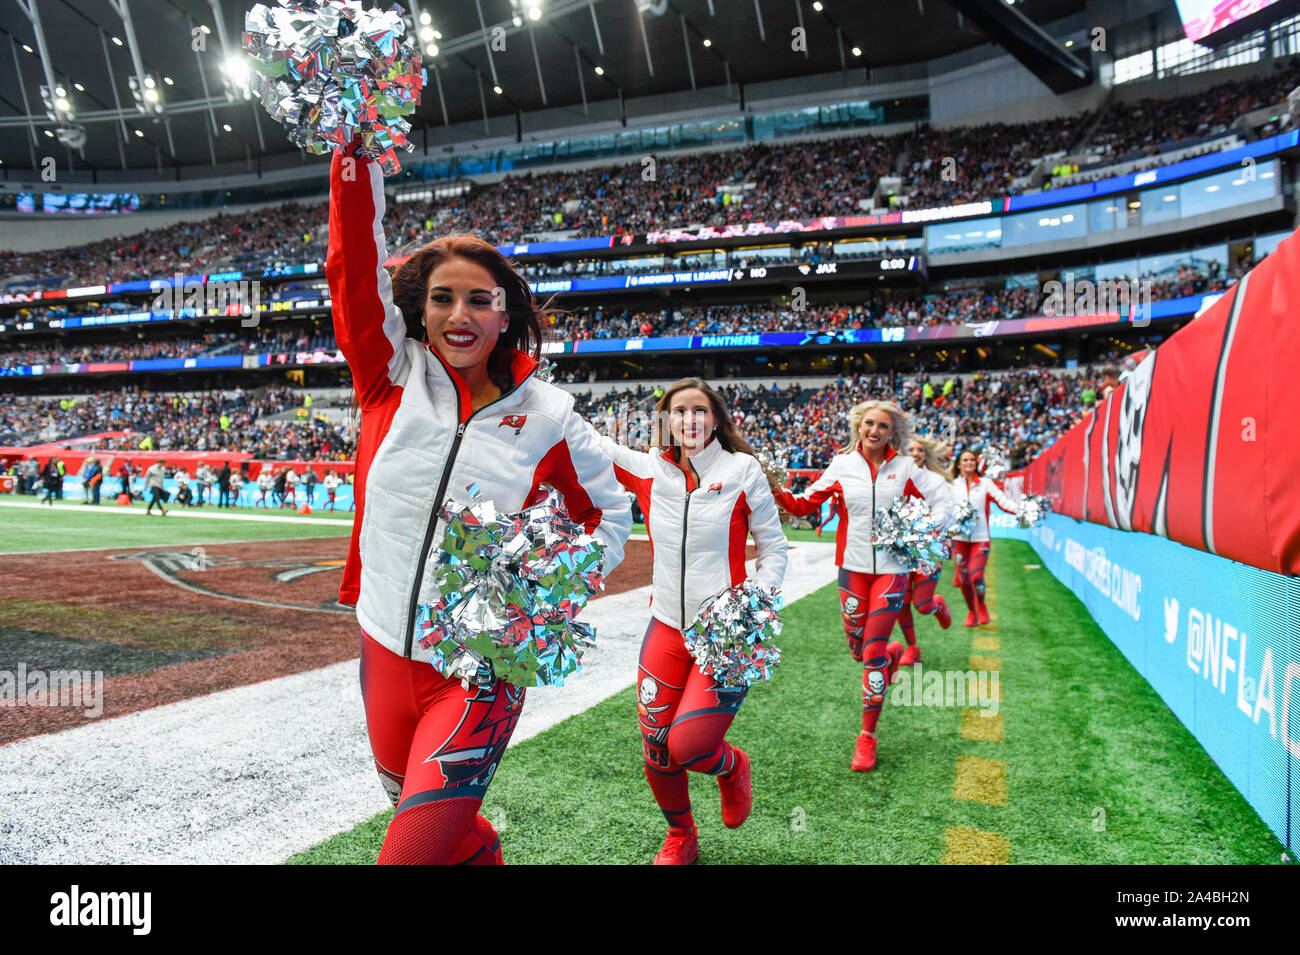 London, UK.  13 October 2019. Buccaneers cheerleaders ahead of the NFL match Tampa Bay Buccaneers v Carolina Panthers at Tottenham Hotspur Stadium. Final score Buccaneers 26, Panthers 37.   Credit: Stephen Chung / Alamy Live News Stock Photo